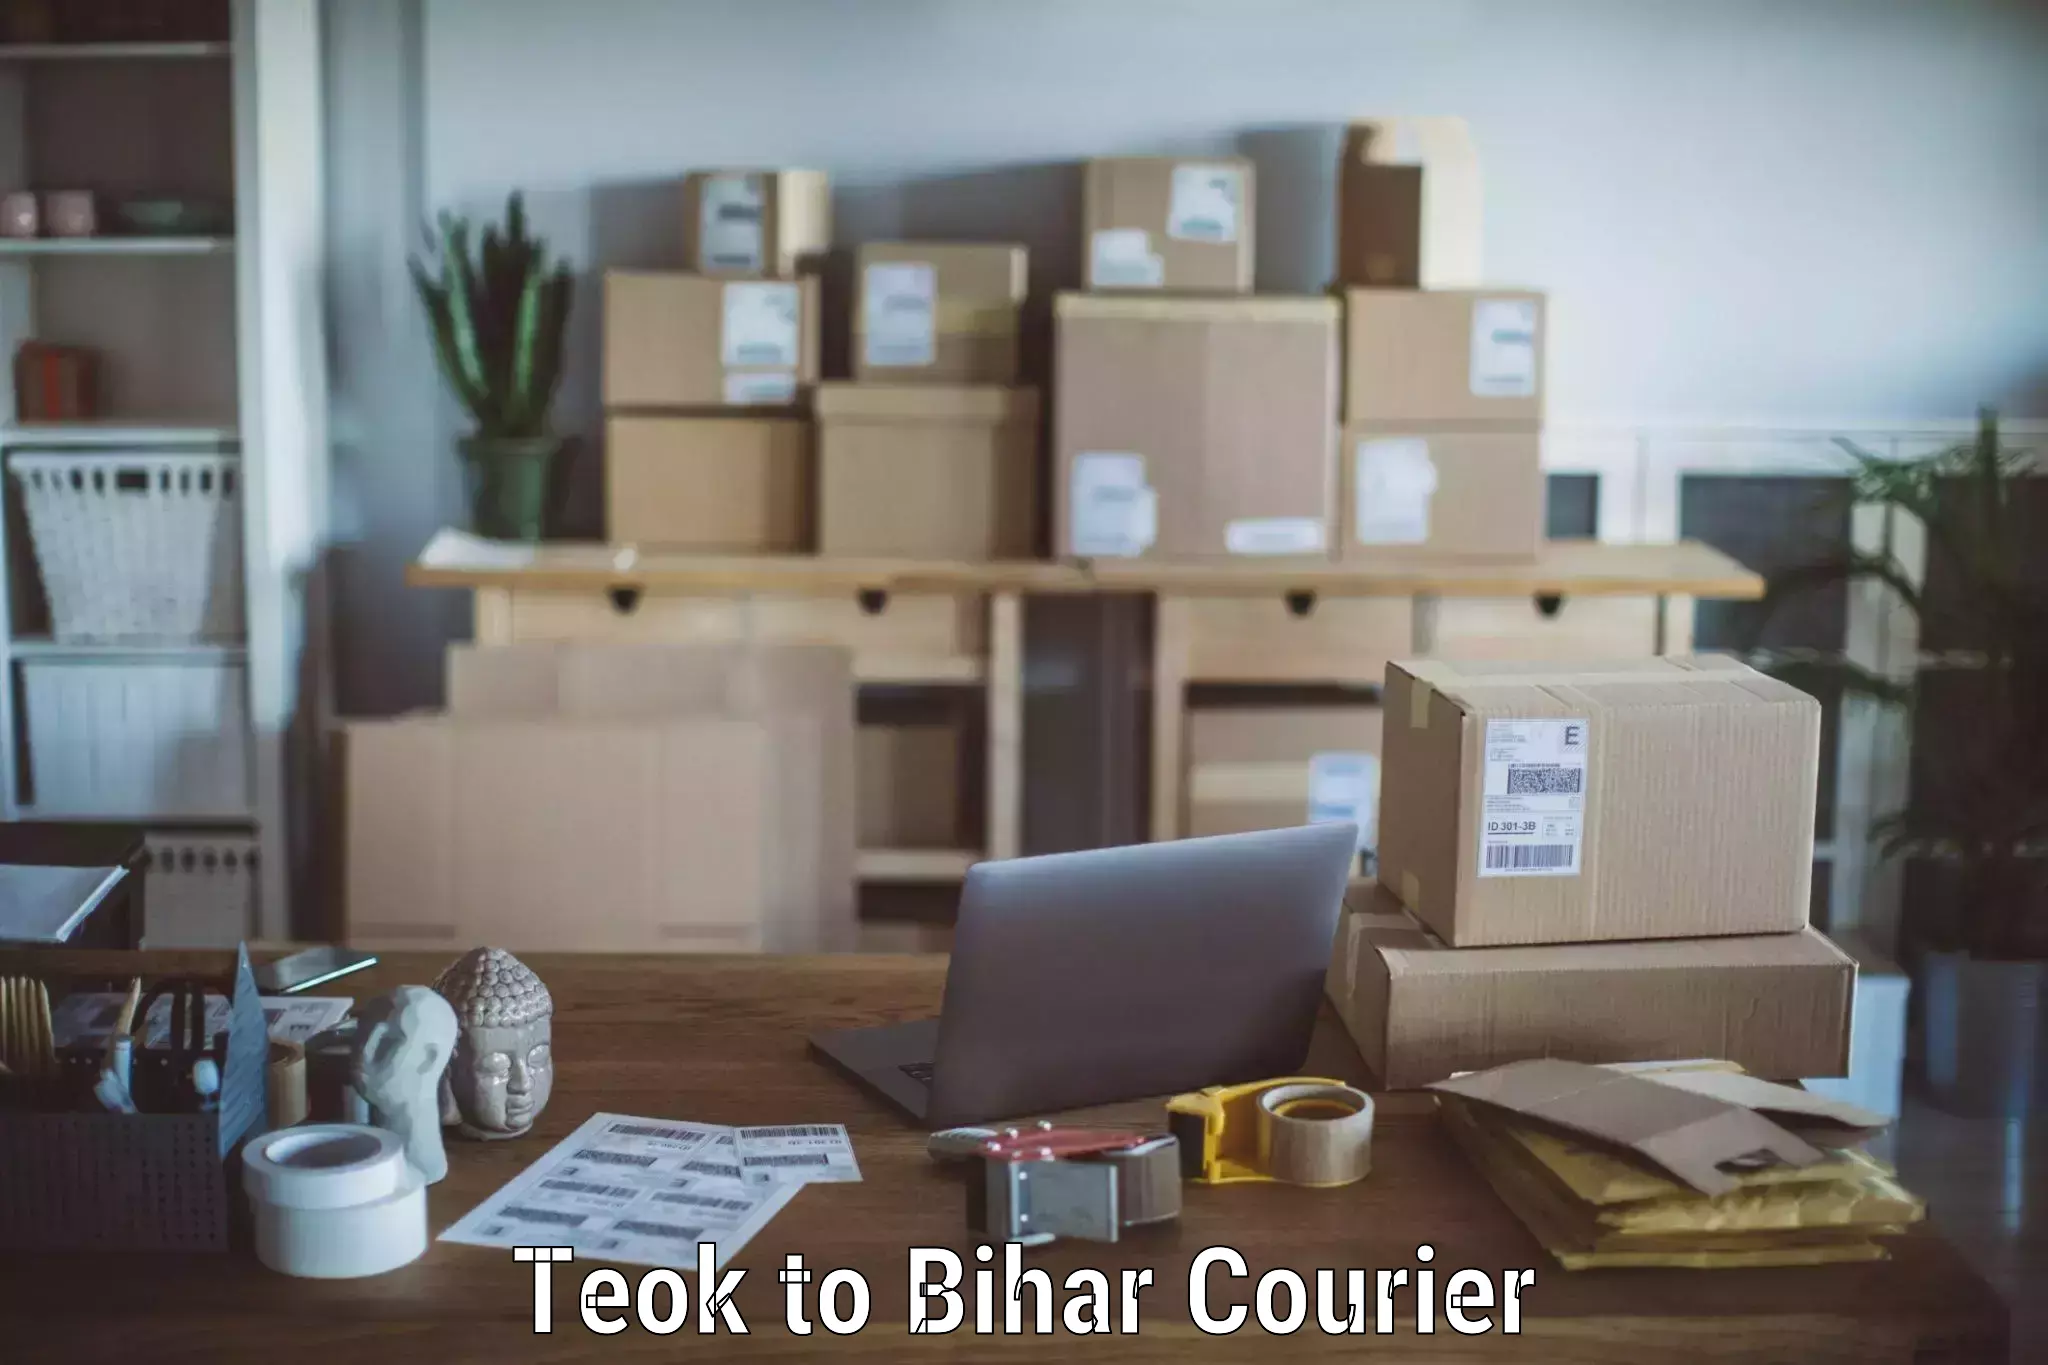 Trusted relocation experts Teok to Buxar